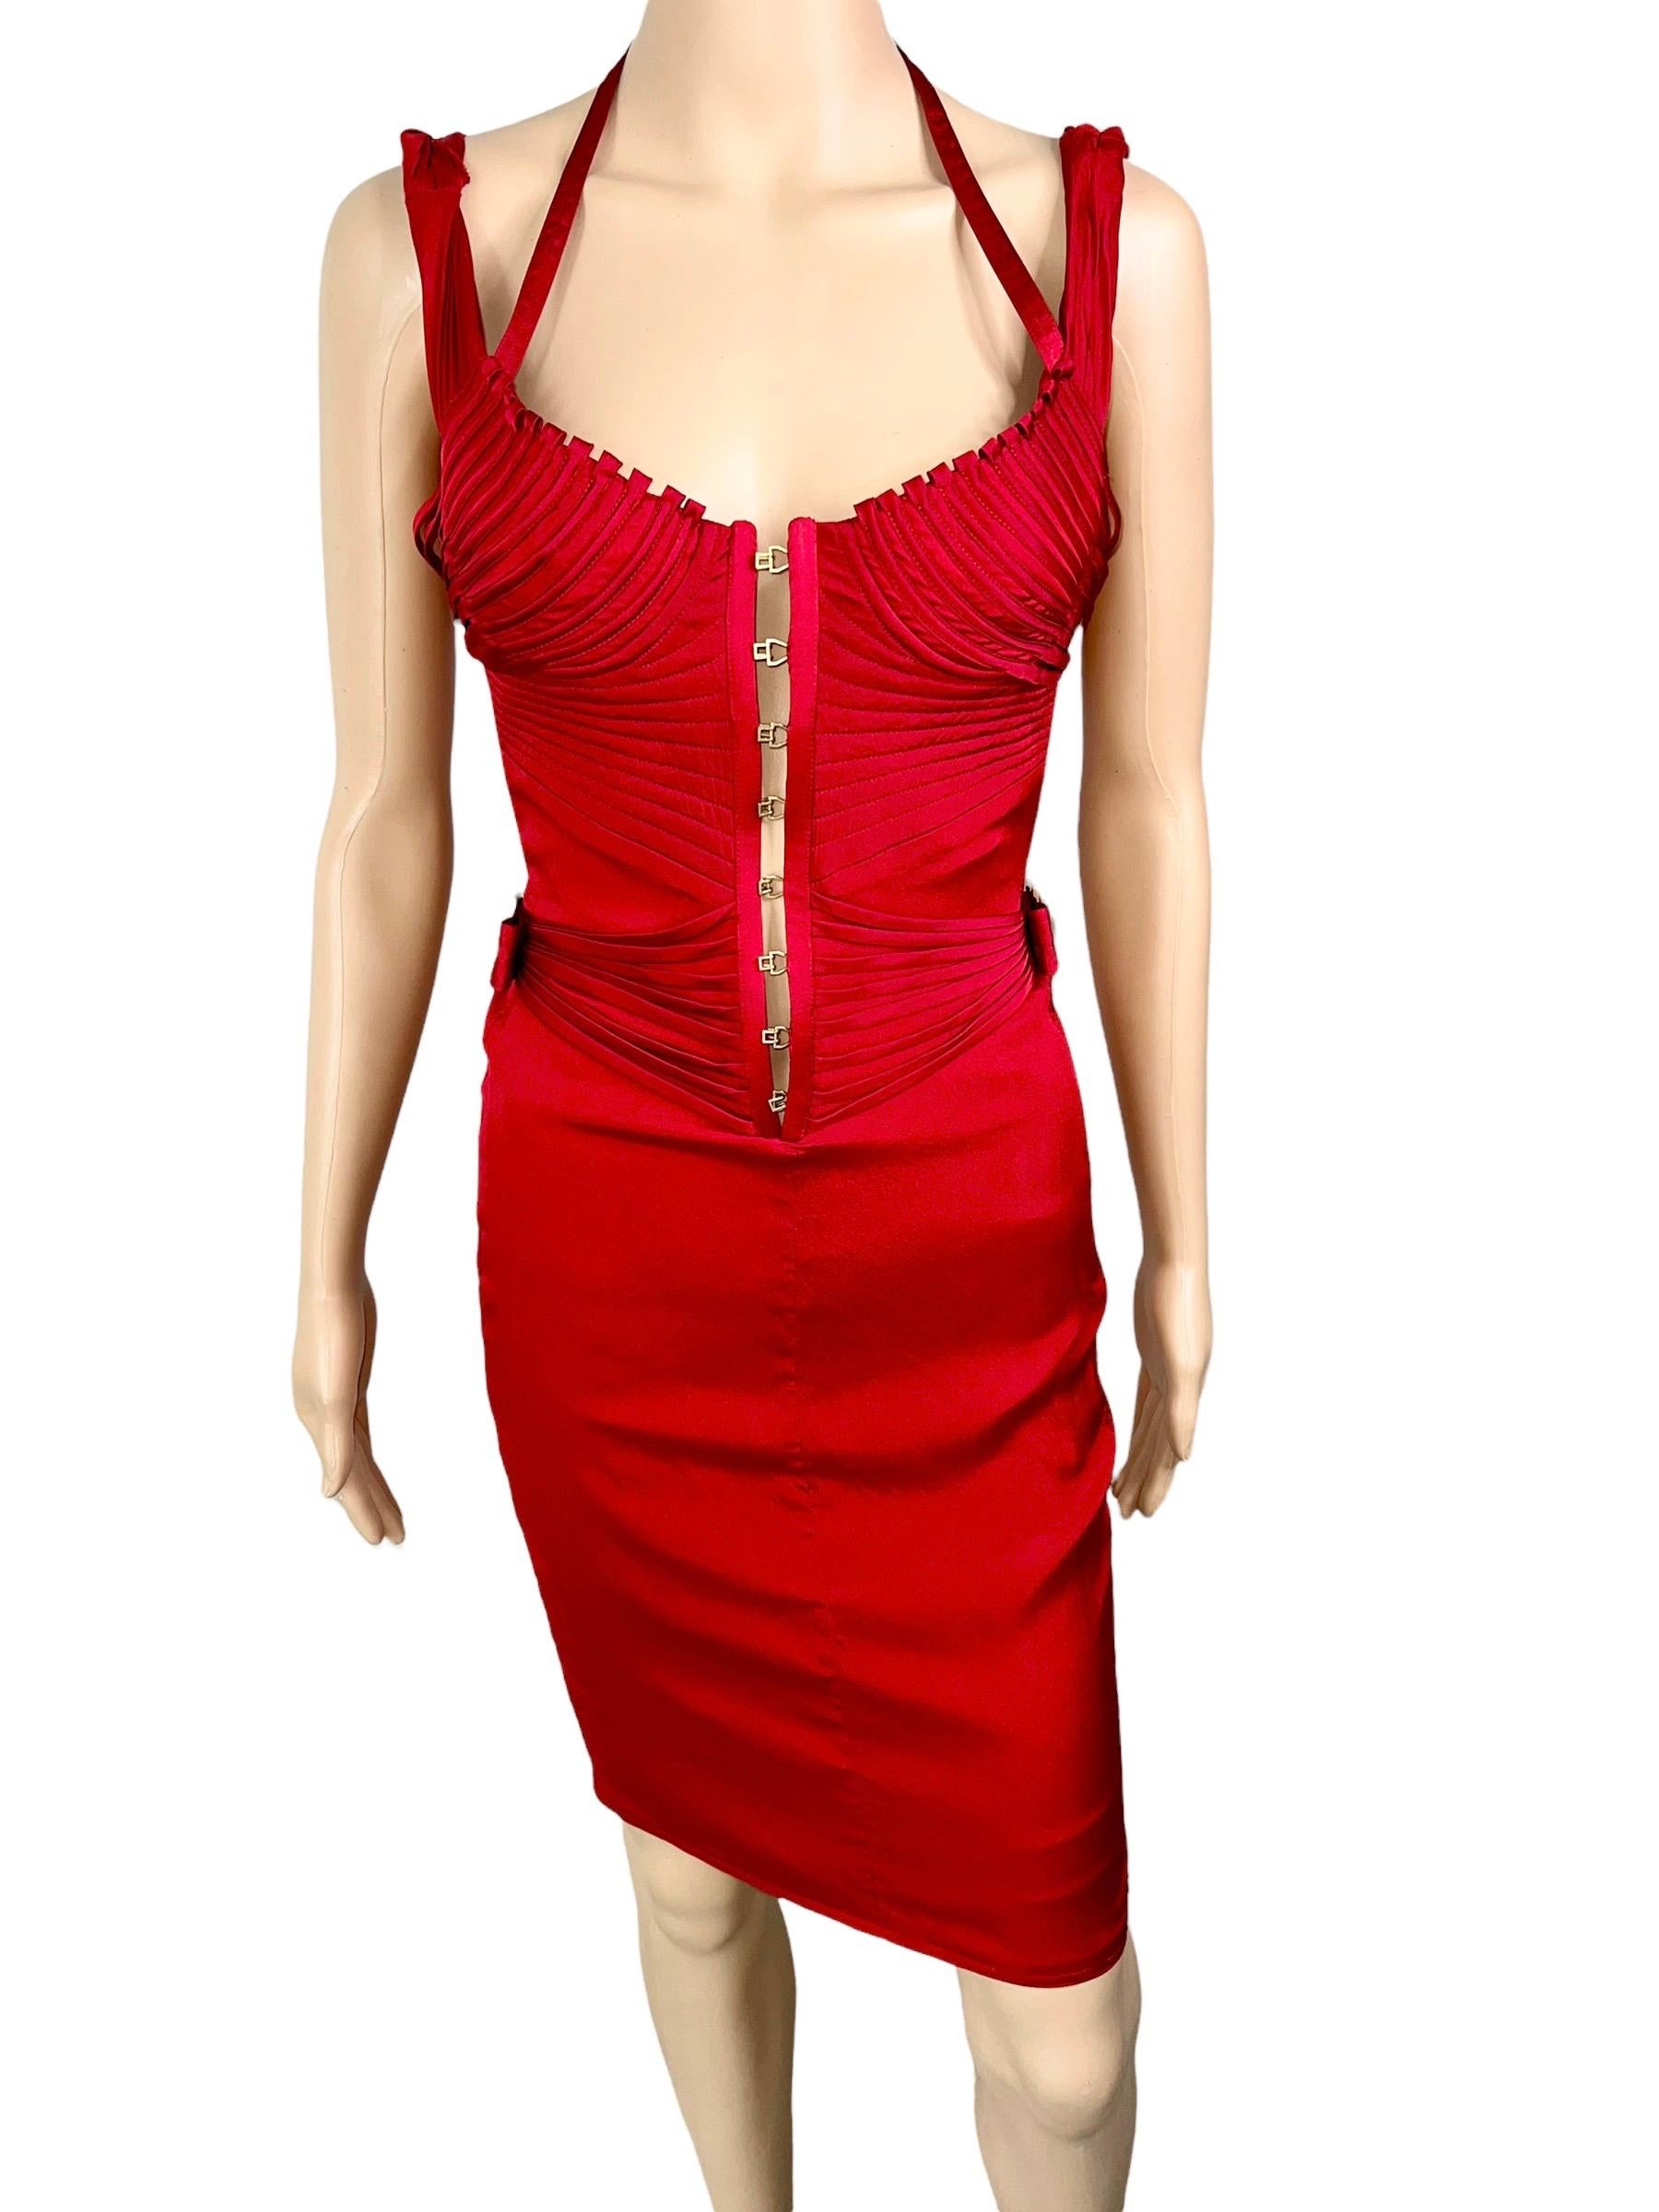 Tom Ford for Gucci F/W 2003 Runway Bustier Corset Silk Red Dress IT 38

Tom Ford for Gucci silk red dress with structured bust featuring concealed corset bodice, hook-and-eye closures at center front and concealed zip closure at center back.